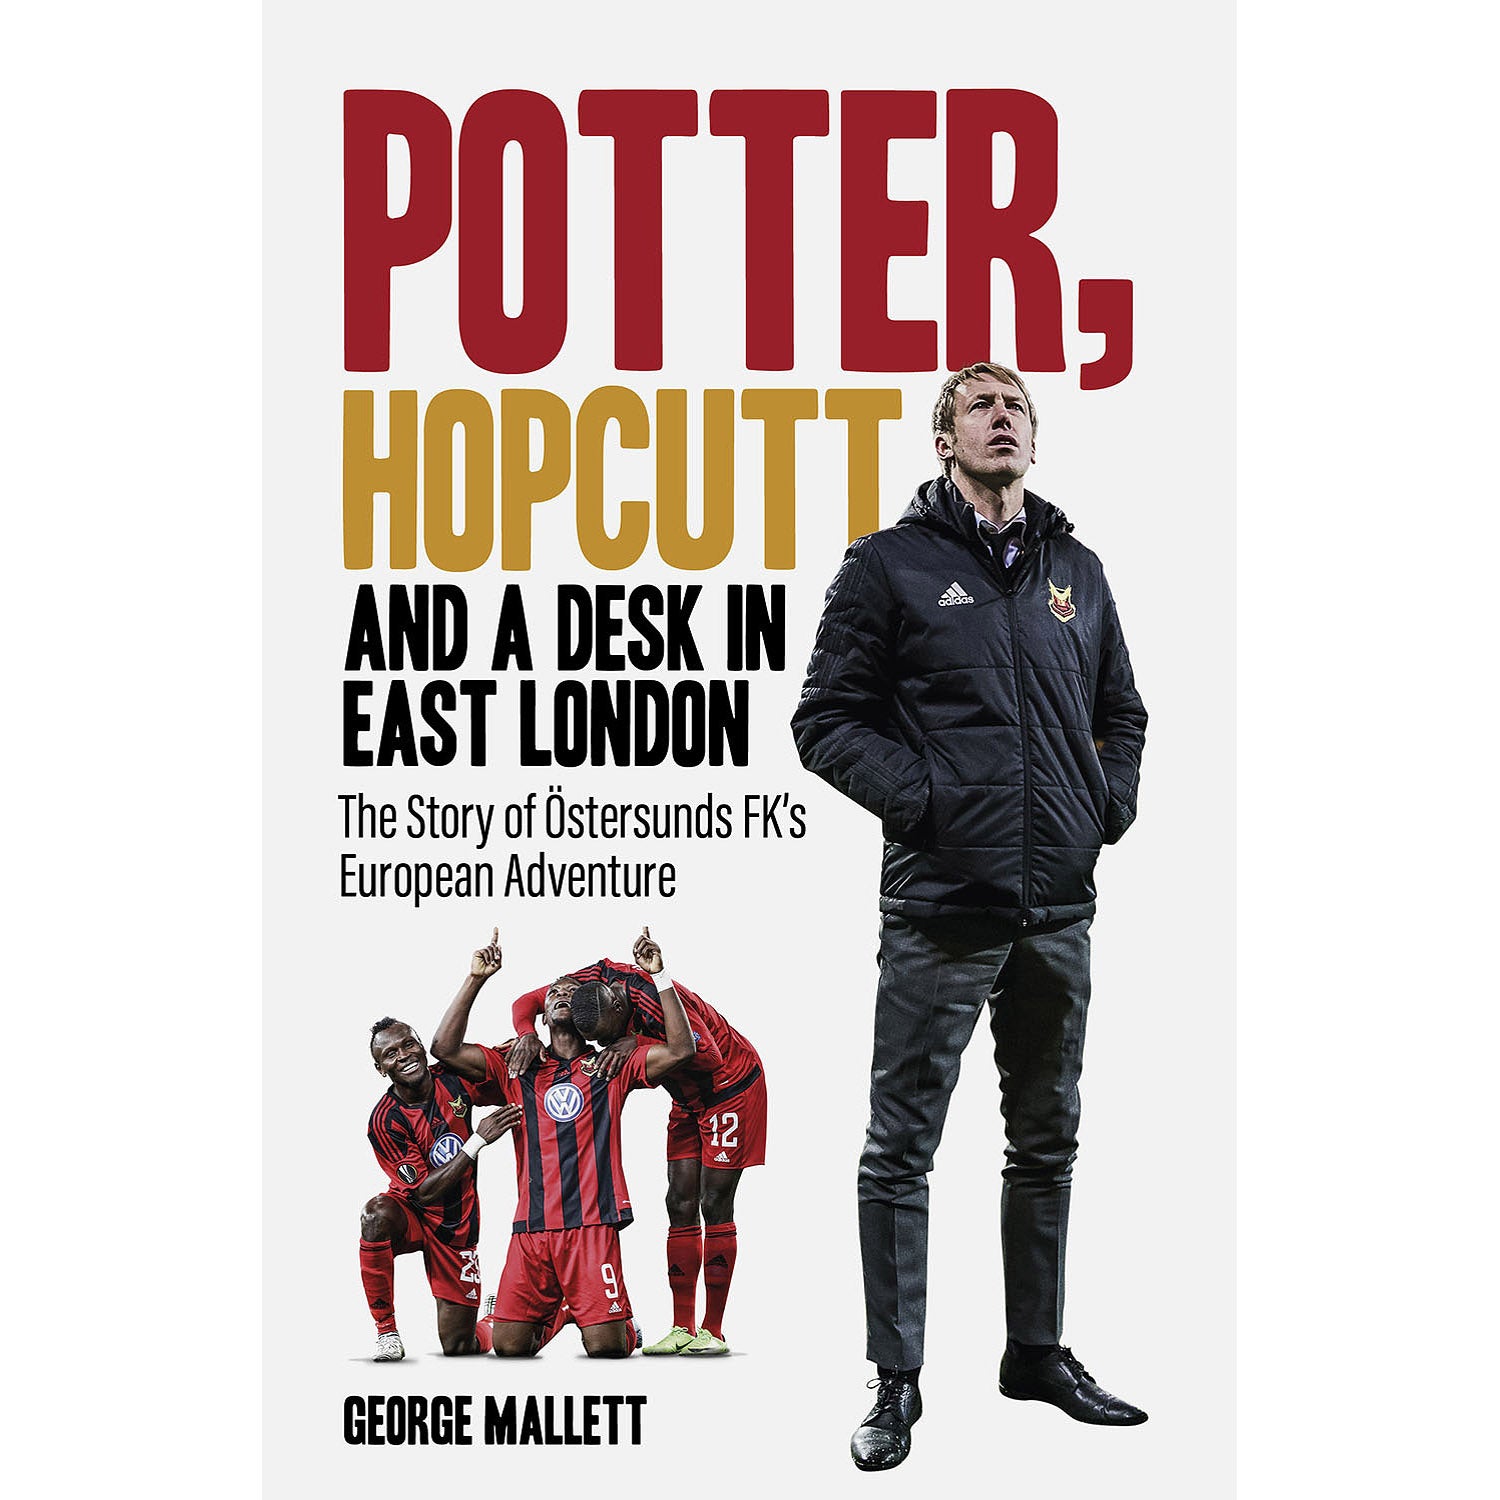 Potter, Hopcutt and a Desk in East London – The Story of Ostersund FK's European Adventure